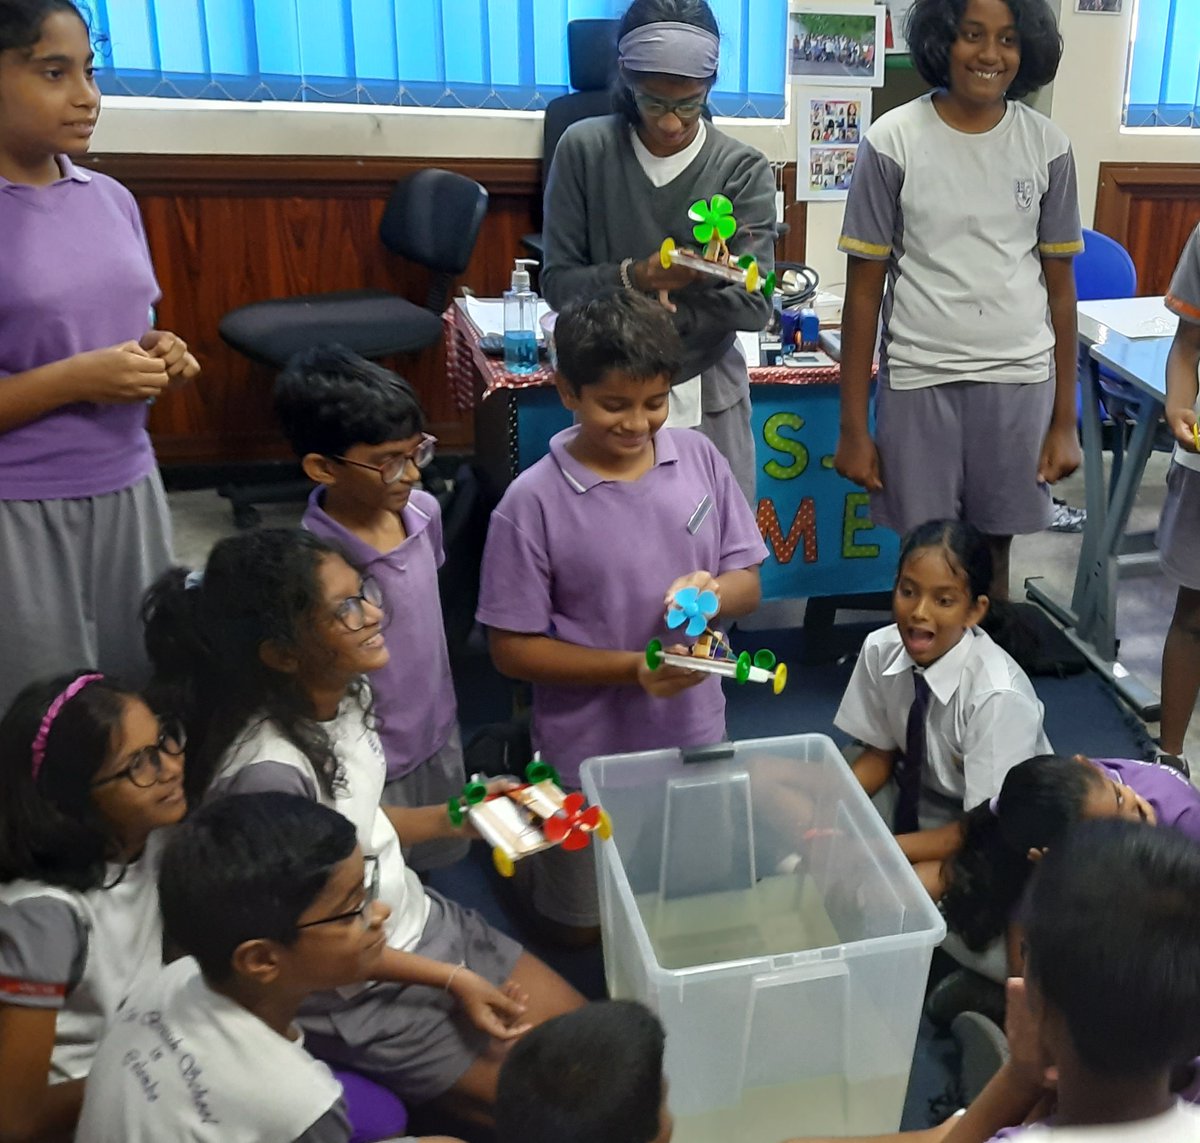 Grade 5 boys and girls of The British School in Colombo had a blast at the Innovation and Robotics Workshop organized by IgniterSpace
#igniterspace #innovationworkshop #roboticsforkids #younginventors
#inspiringyoungminds #thebritishschoolcolombo #LearningIsFun #FutureInnovators